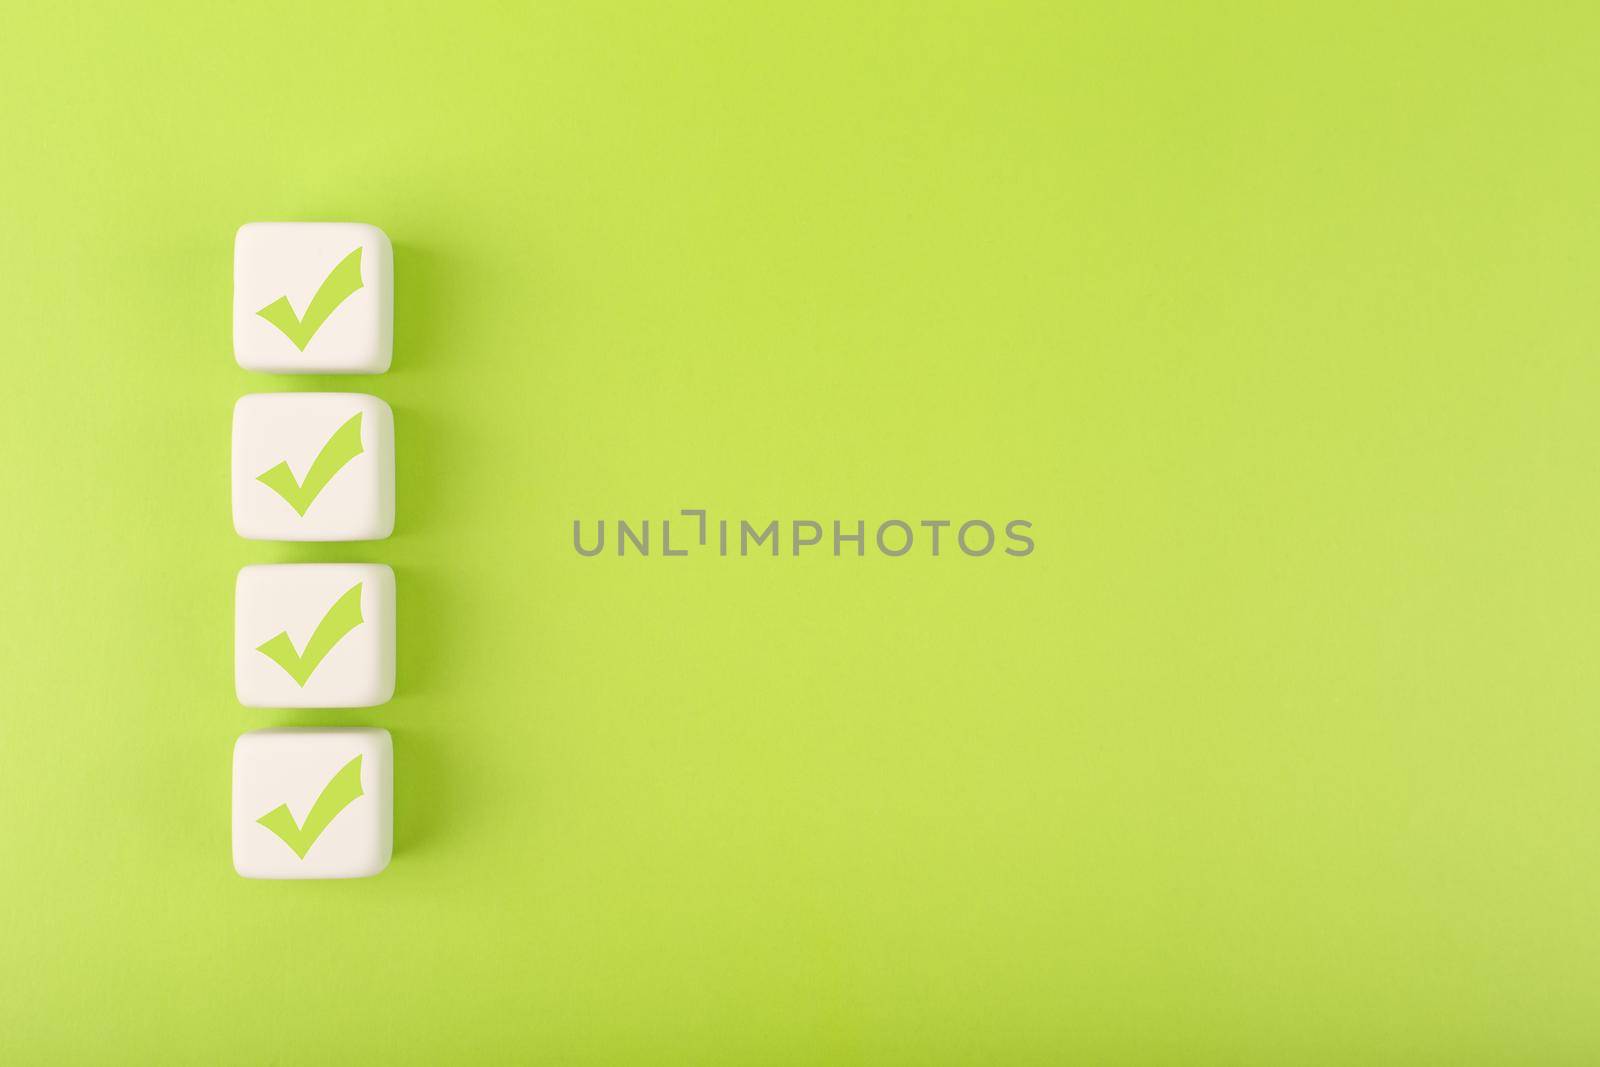 Four checkmarks on white cubes against bright green background with copy space. Concept of questionary, checklist, to do list, planning, business or verification. Creative minimal composition 